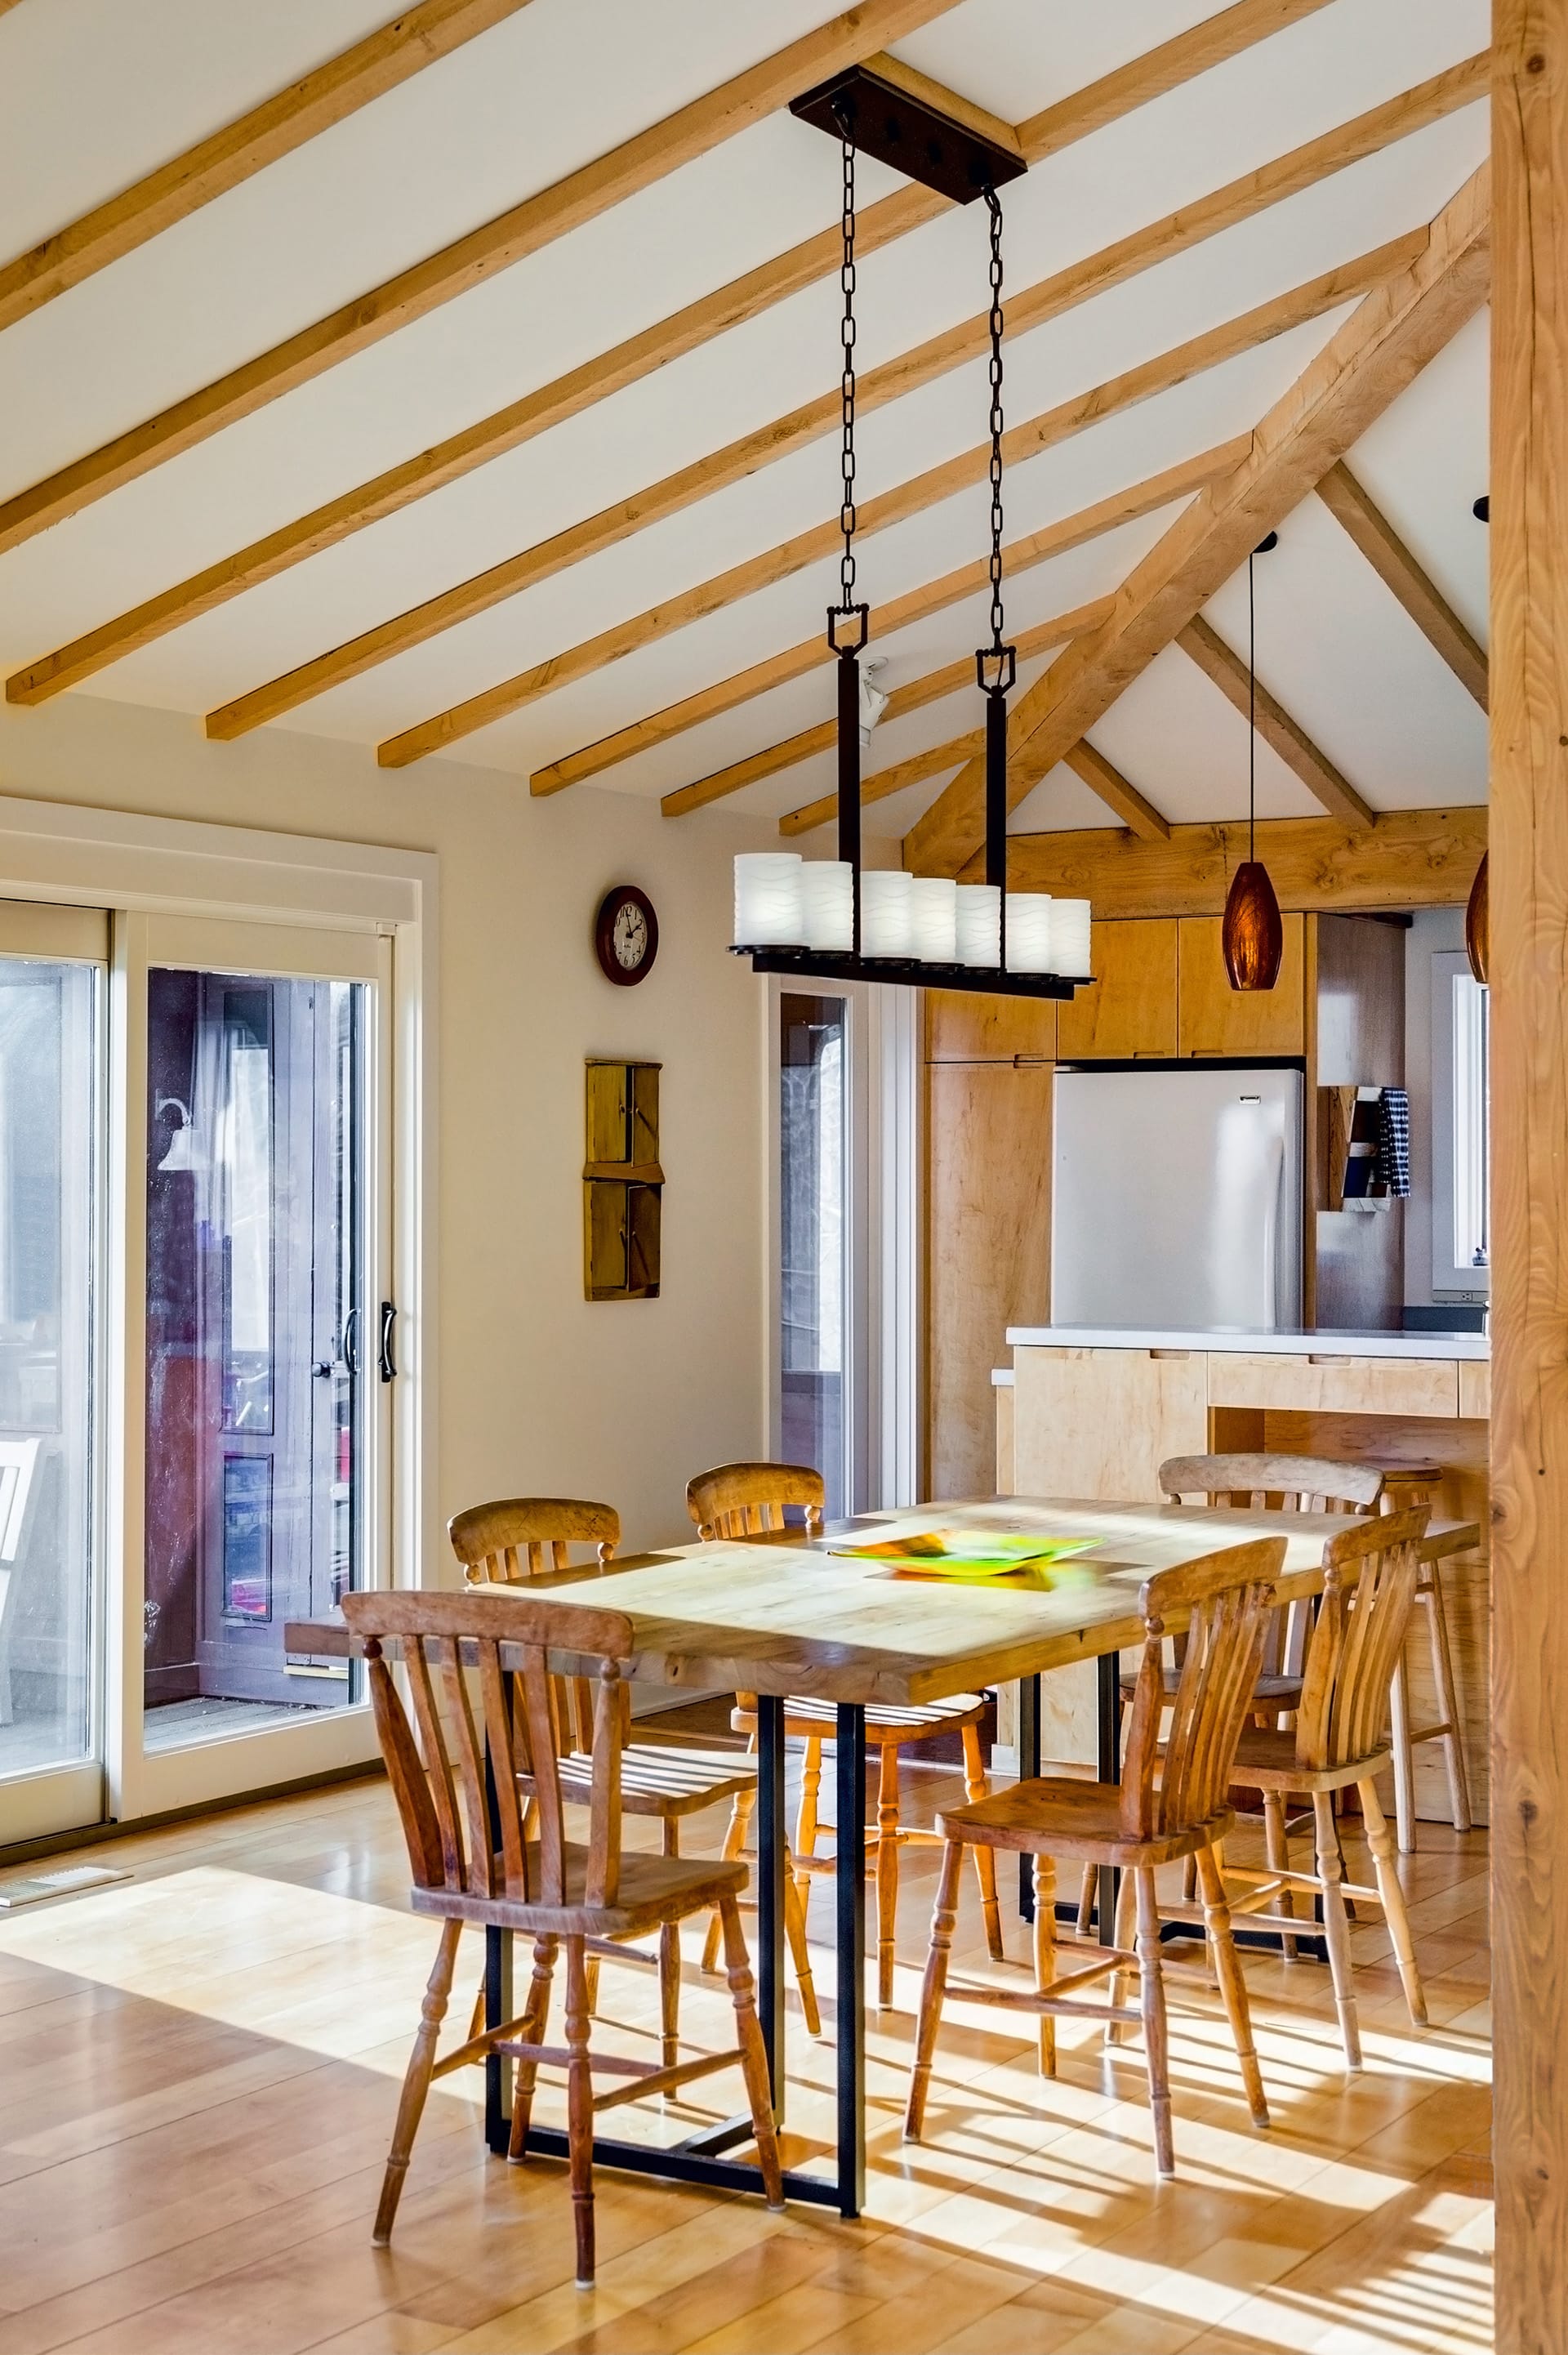 Dining area in front of the kitchen in a Connecticut home. The wooden table matches the floors, cabinetry, and exposed ceiling beams.